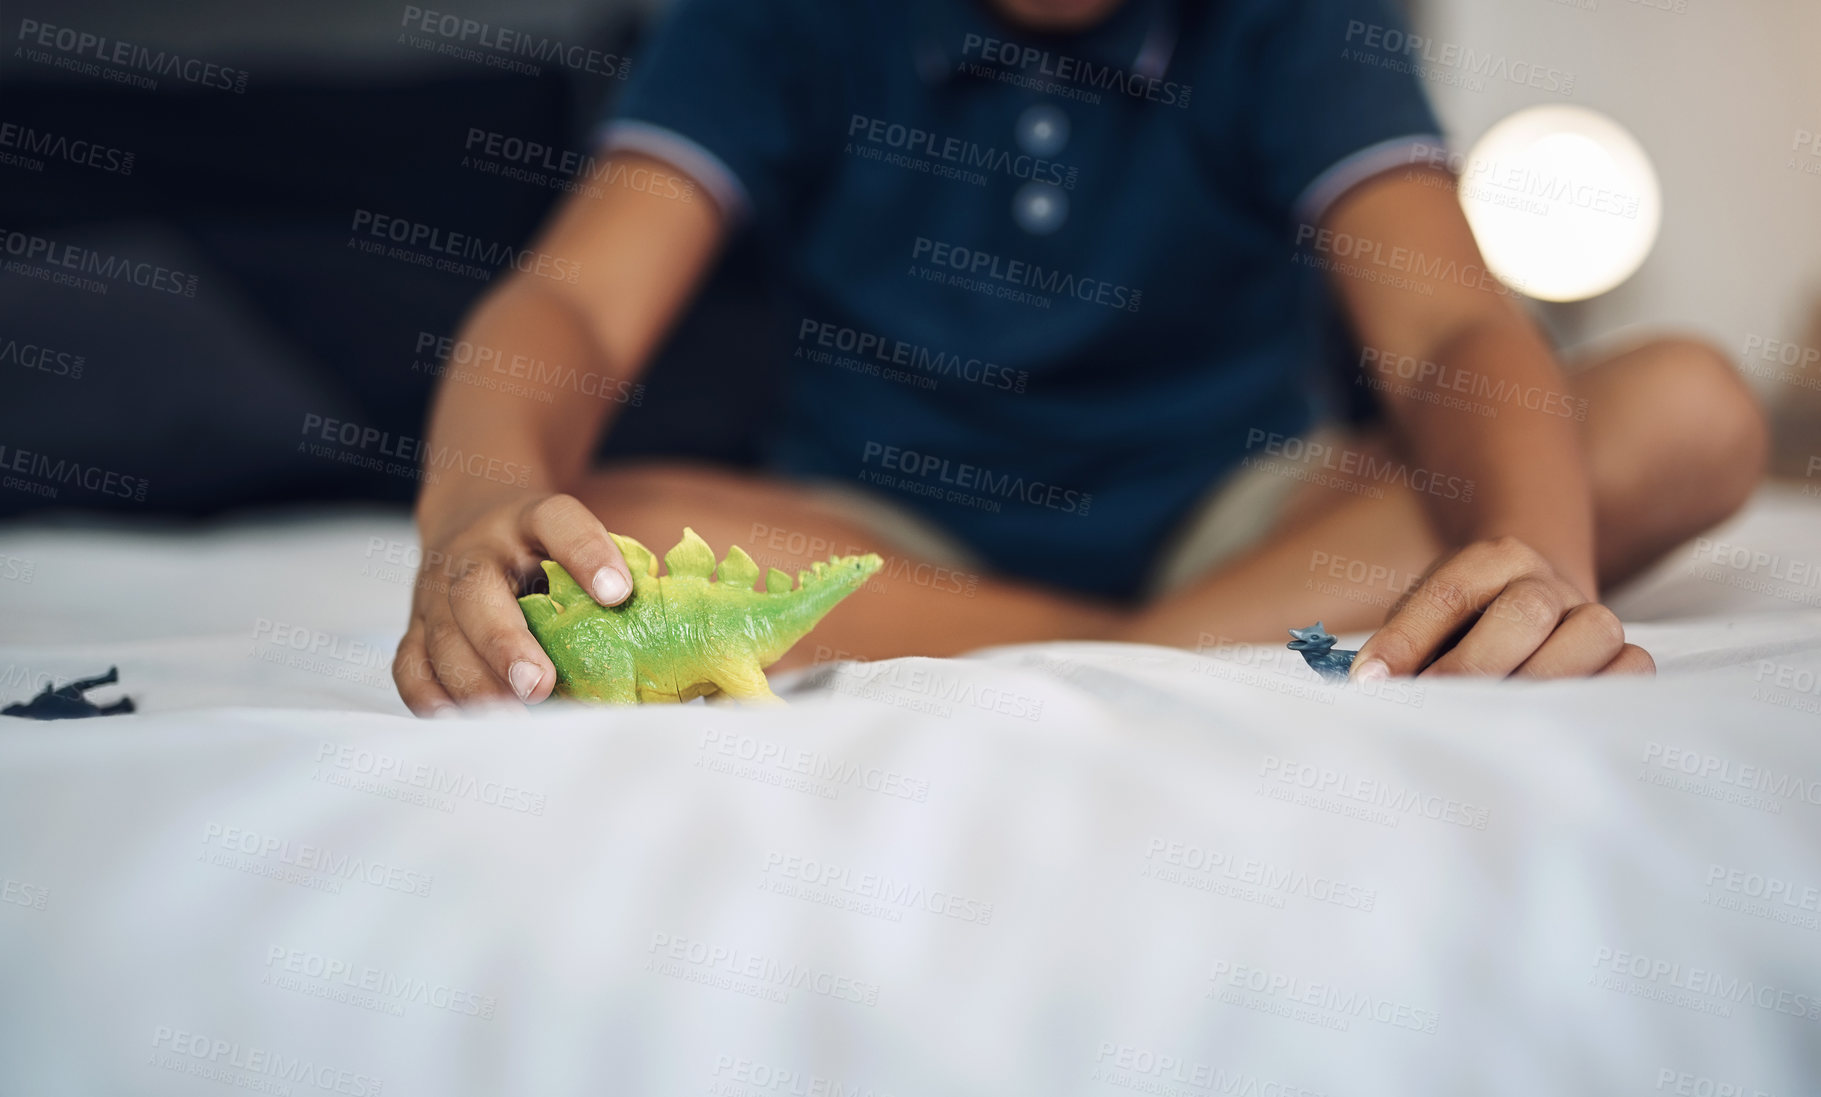 Buy stock photo Cropped shot of an unrecognizable boy playing with dinosaurs while sitting on his bed